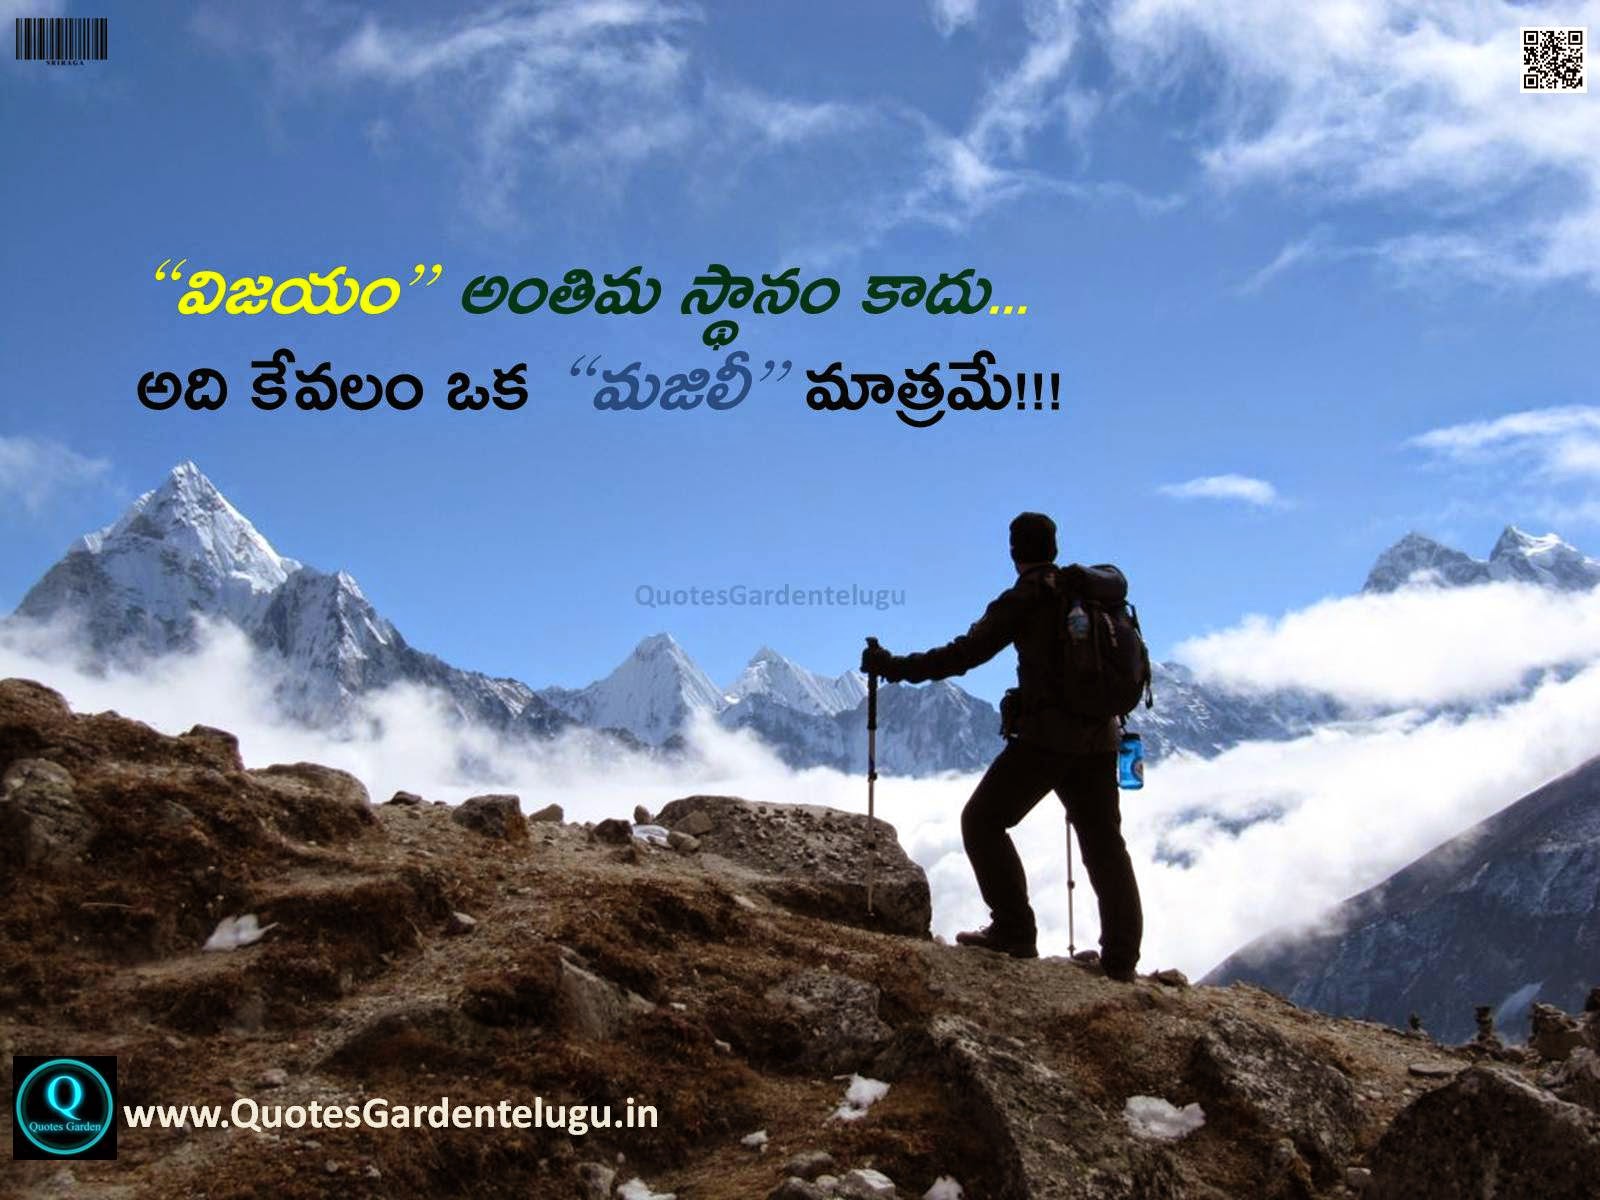 Top Telugu Victory Quotes with Beautiful images 2004151 wallpapers